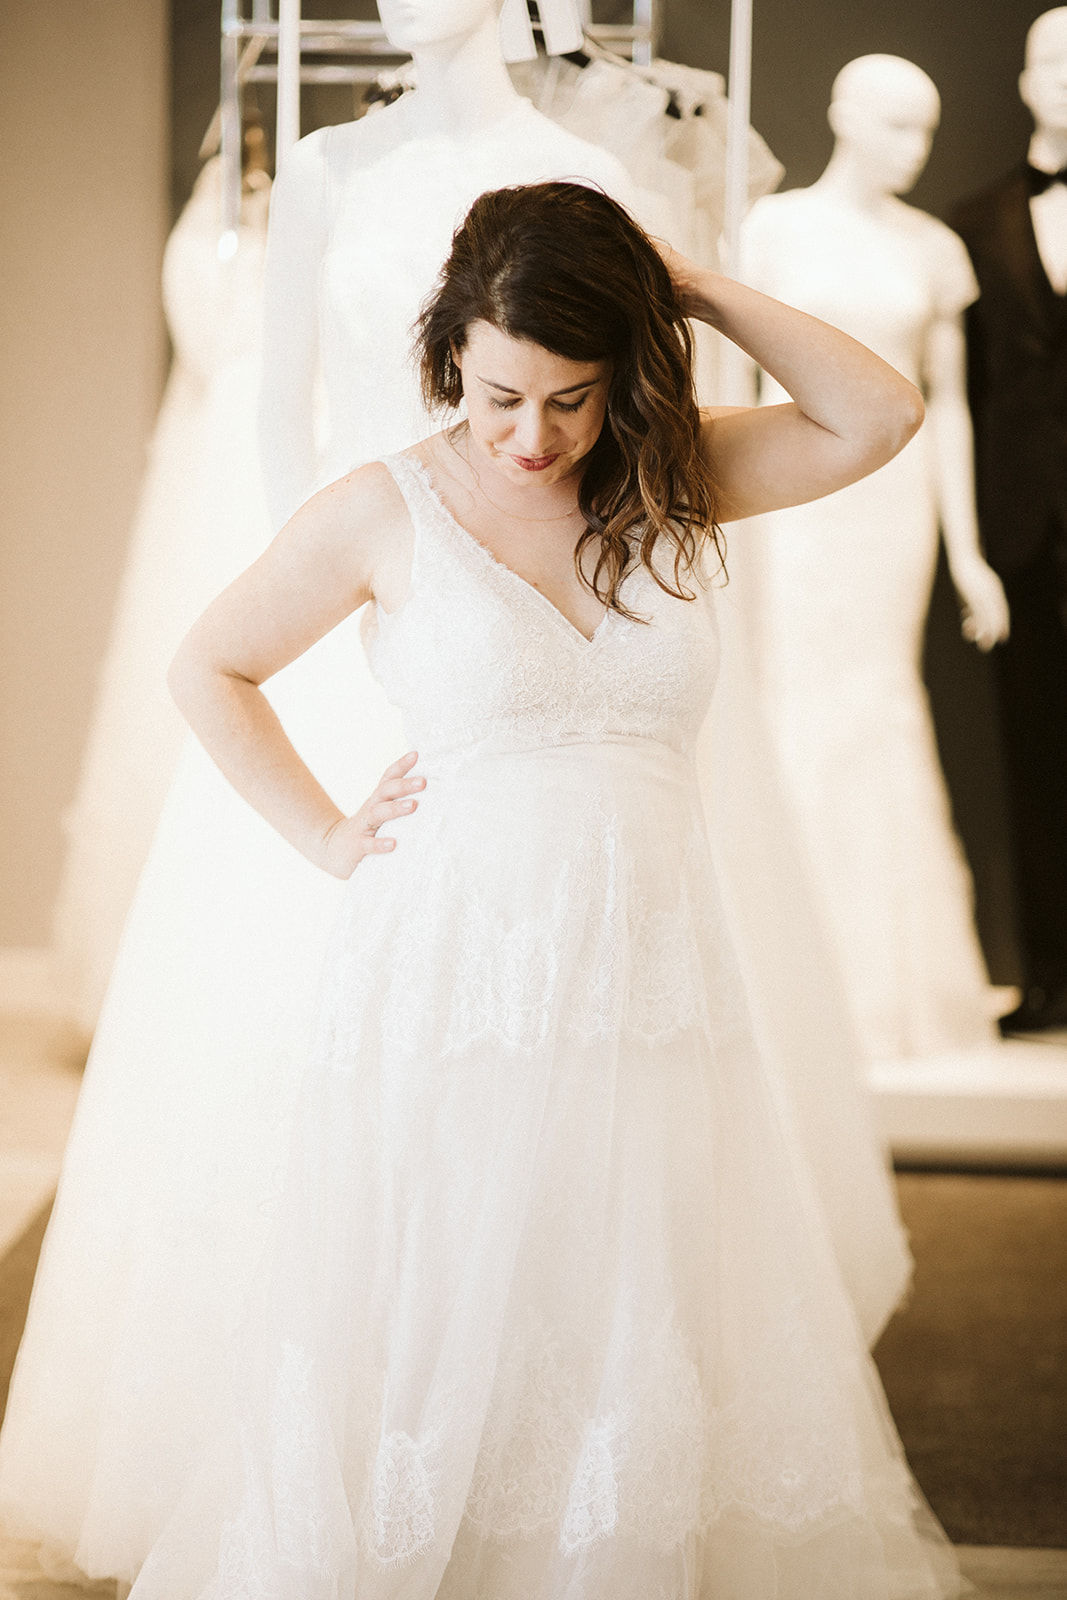 A woman with long brown hair touches her head as she looks down while wearing a sleeveless v-neck wedding gown with lace appliqués at David's Bridal